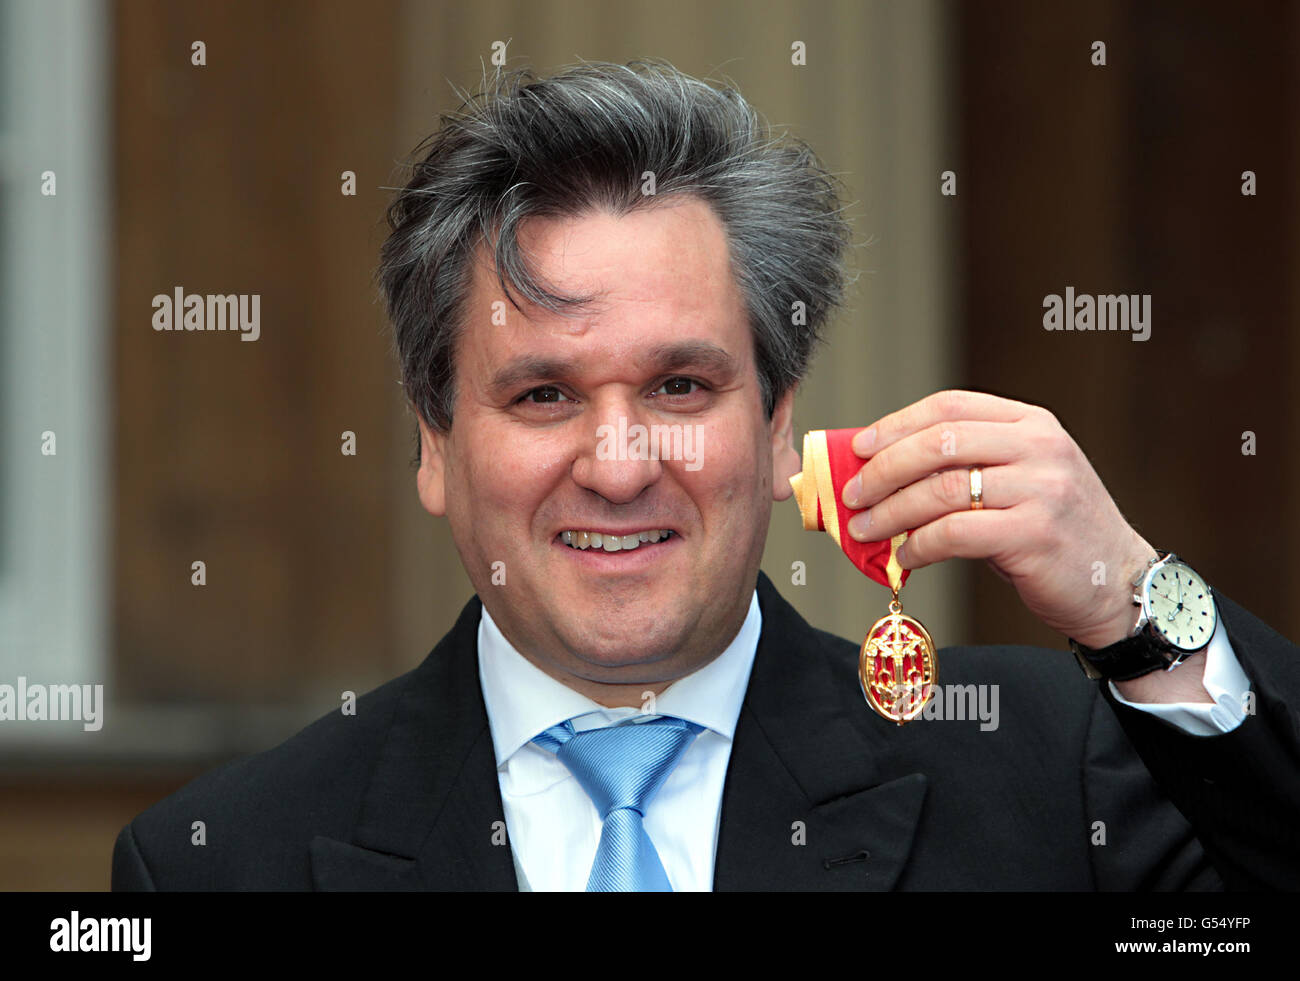 Antonio Pappano, Royal Opera House Music Director, after he was presented with his Knighthood by the Prince of Wales during an Investiture ceremony at Buckingham Palace, central London. Stock Photo